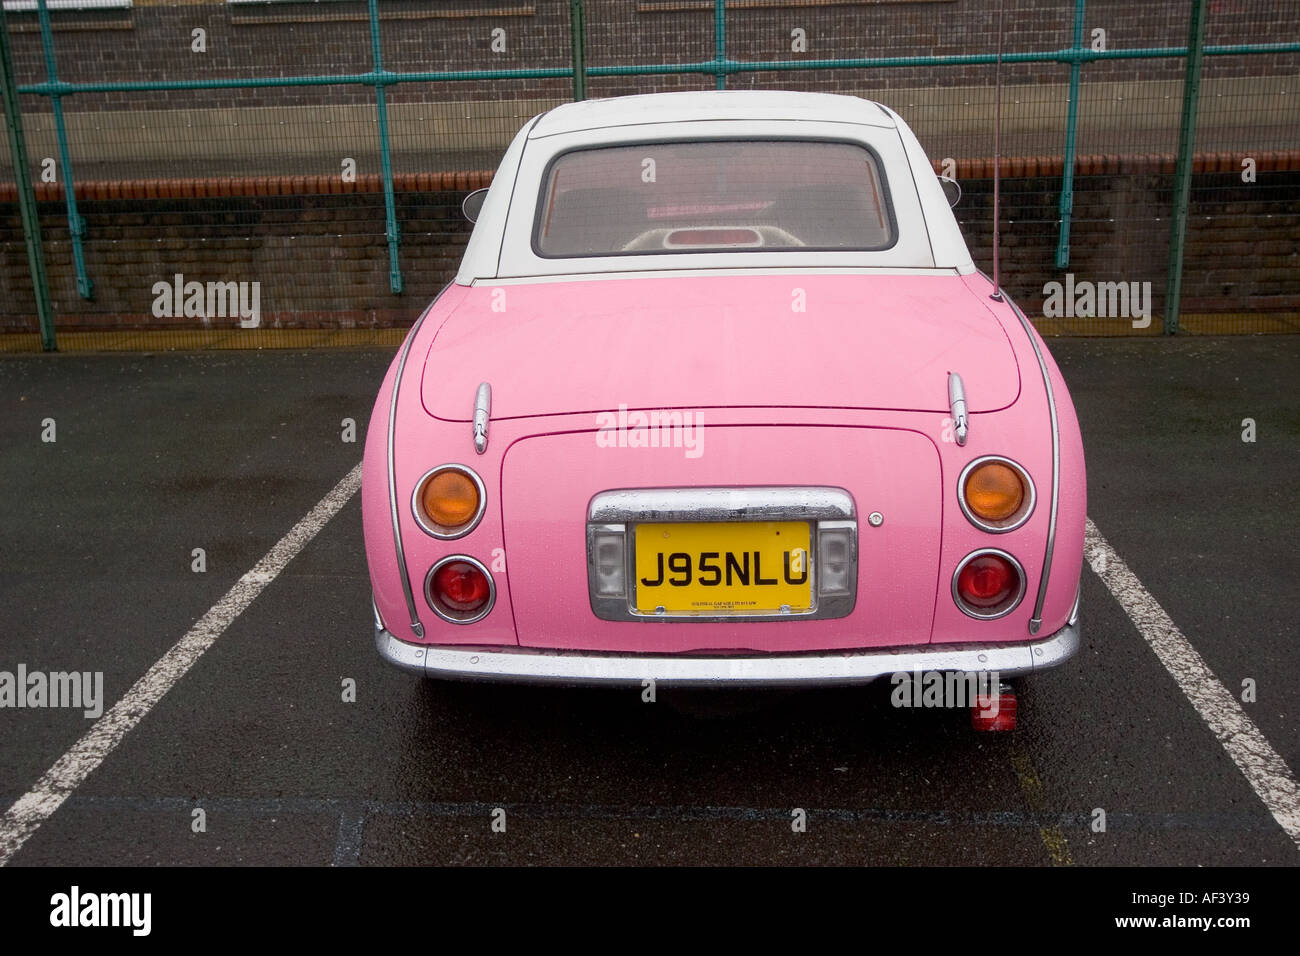 Pink and white two tone Nissan Figaro classic cult car japan Stock Photo